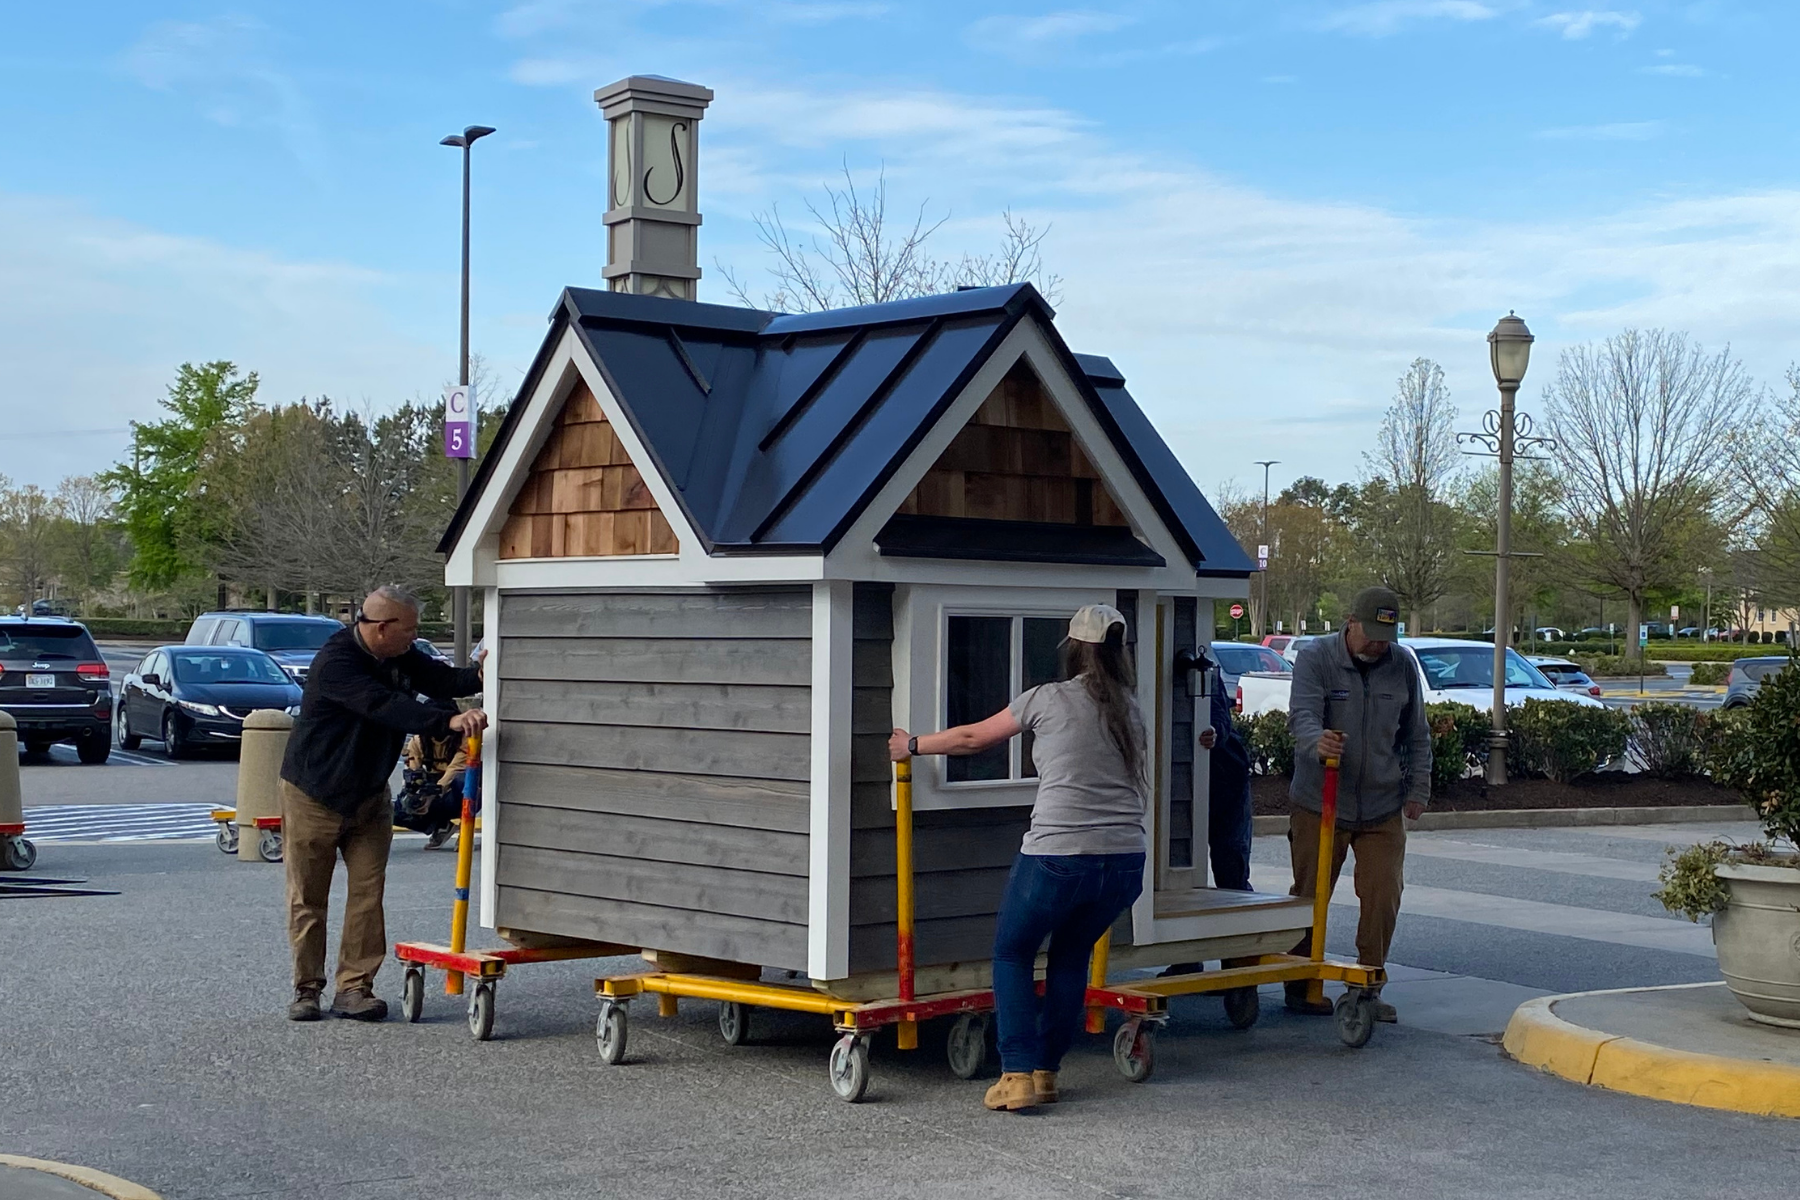 classic playhouse being delivered